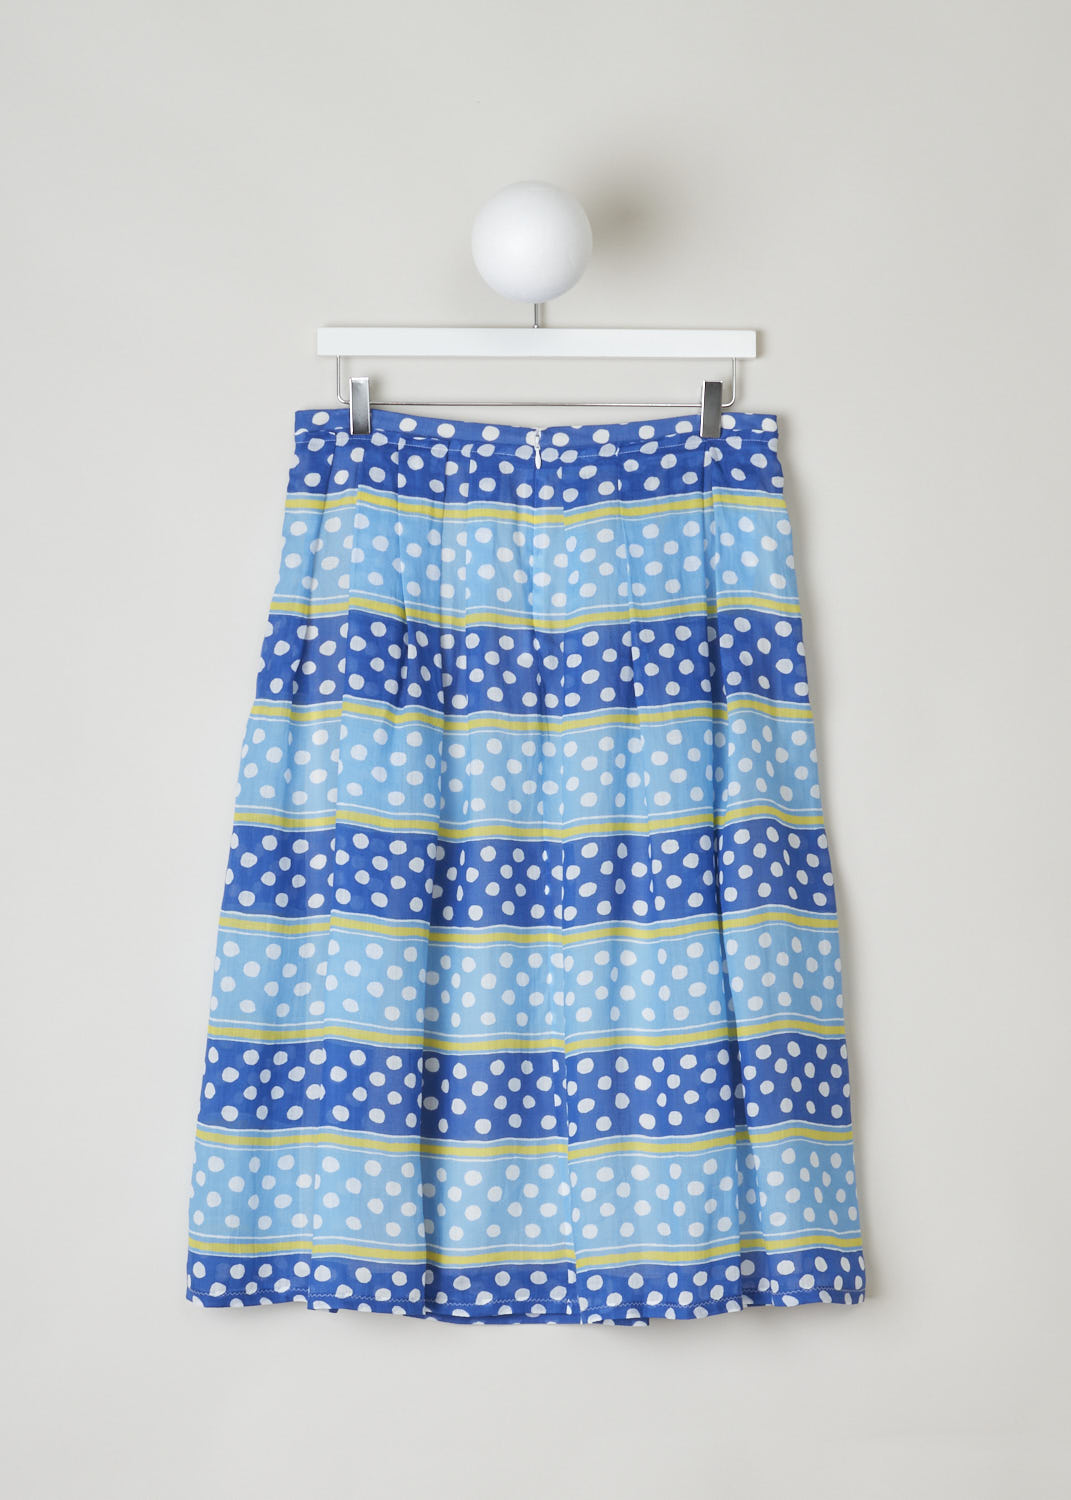 MARNI, COLORFUL DOTS AND STRIPES SKIRT, GOMA0420A0_UTR023_DSB57, Blue, Print, Back, This colorful dots and stripes midi skirt is pleated throughout. The skirt has a layered hem around the waist with white stitching. In the back the concealed zipper and snap closure can be found.